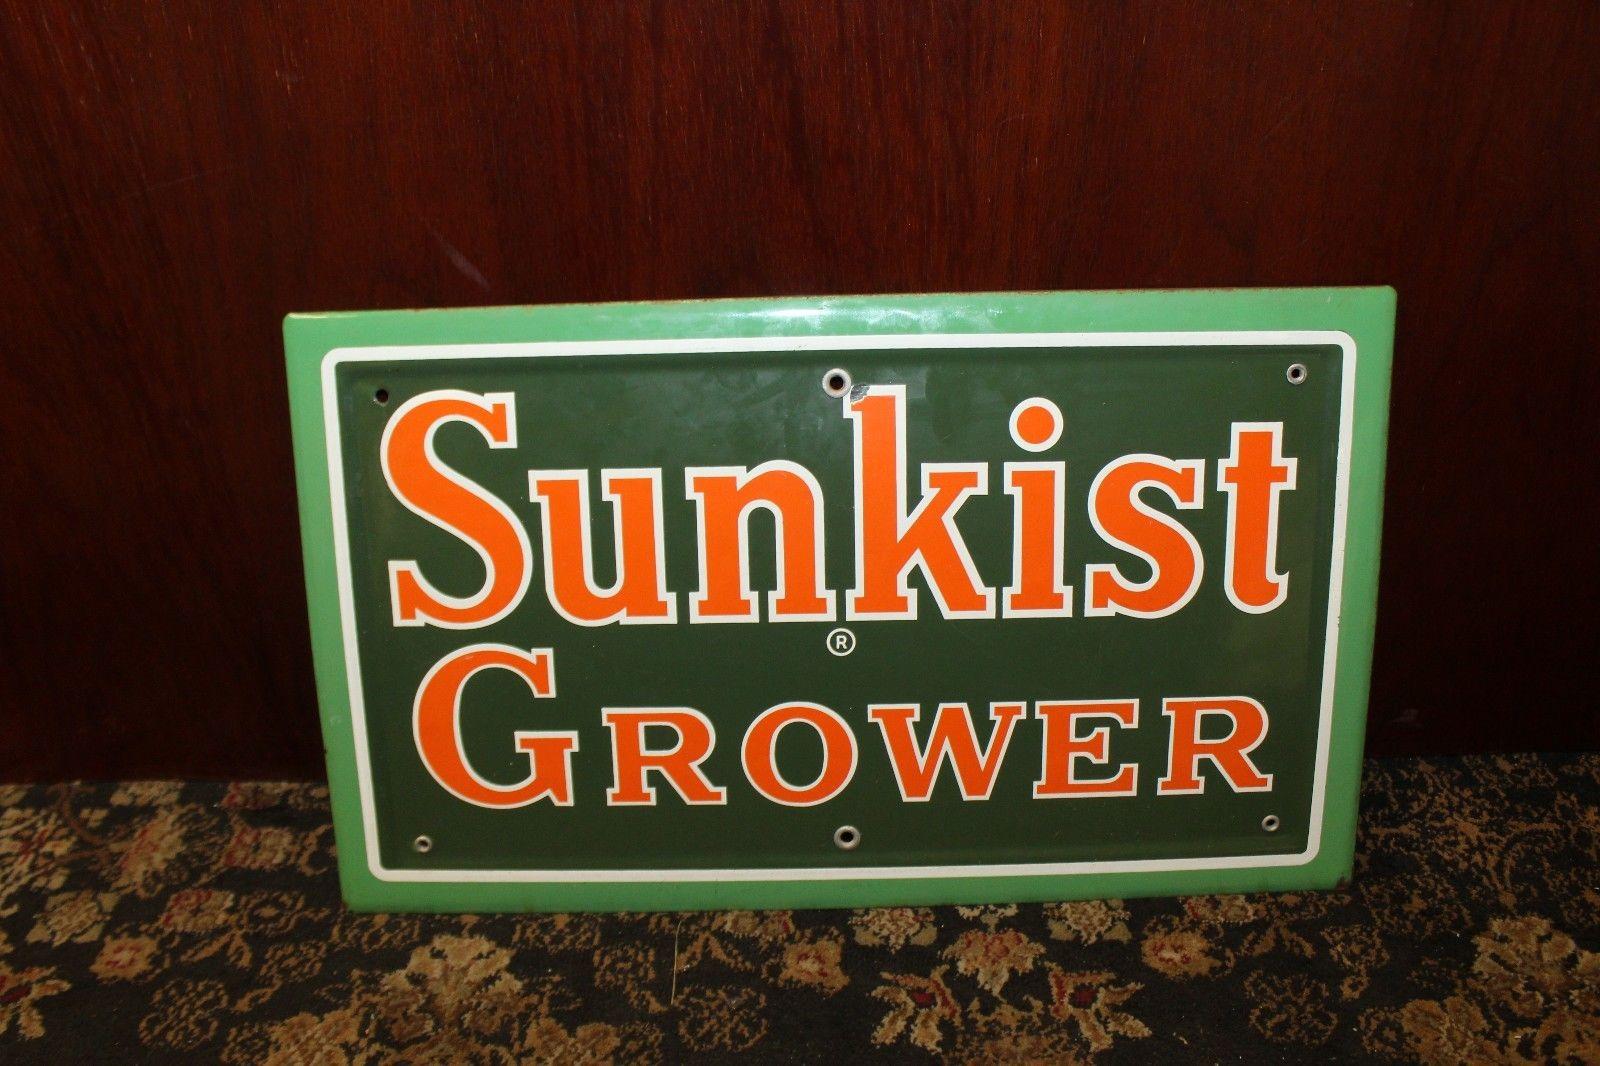 This advertising originally came from the Disney Sunkist Store. In the 1960s and 1970s, Adventureland had its own quick service restaurant sponsored by Sunkist. The Adventureland spot was more popular among park guests, so the Sunkist Citrus House